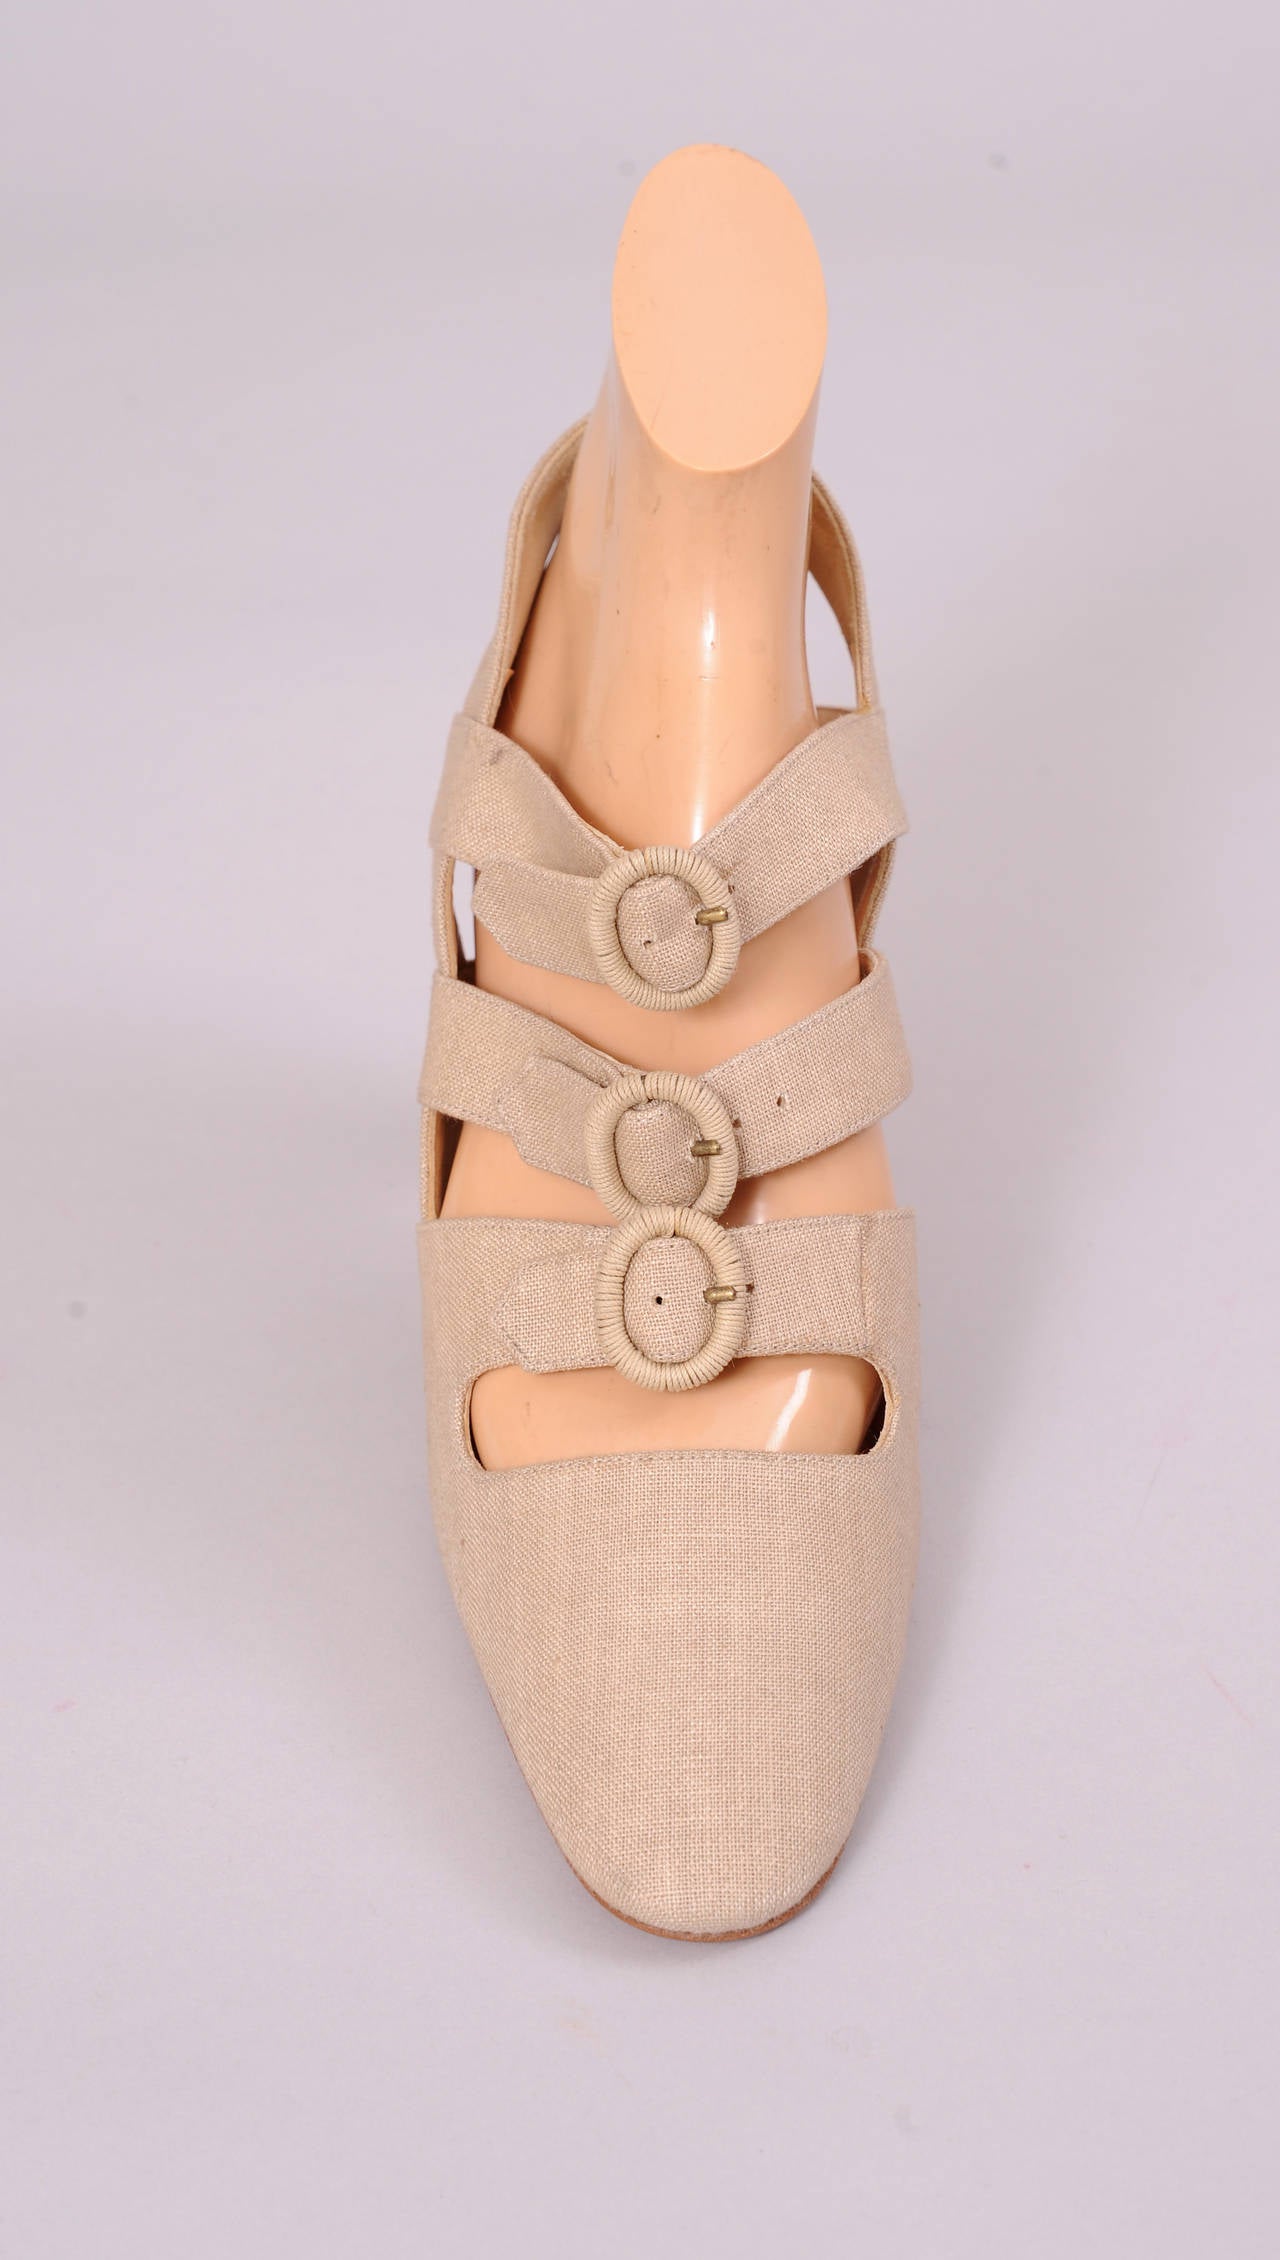 A gorgeous summer shoe, this linen heel form Philippe Model has three buckled straps across the top of your foot and a suede stacked heel. Never worn, they are in excellent condition, and marked a size 40 1/2.